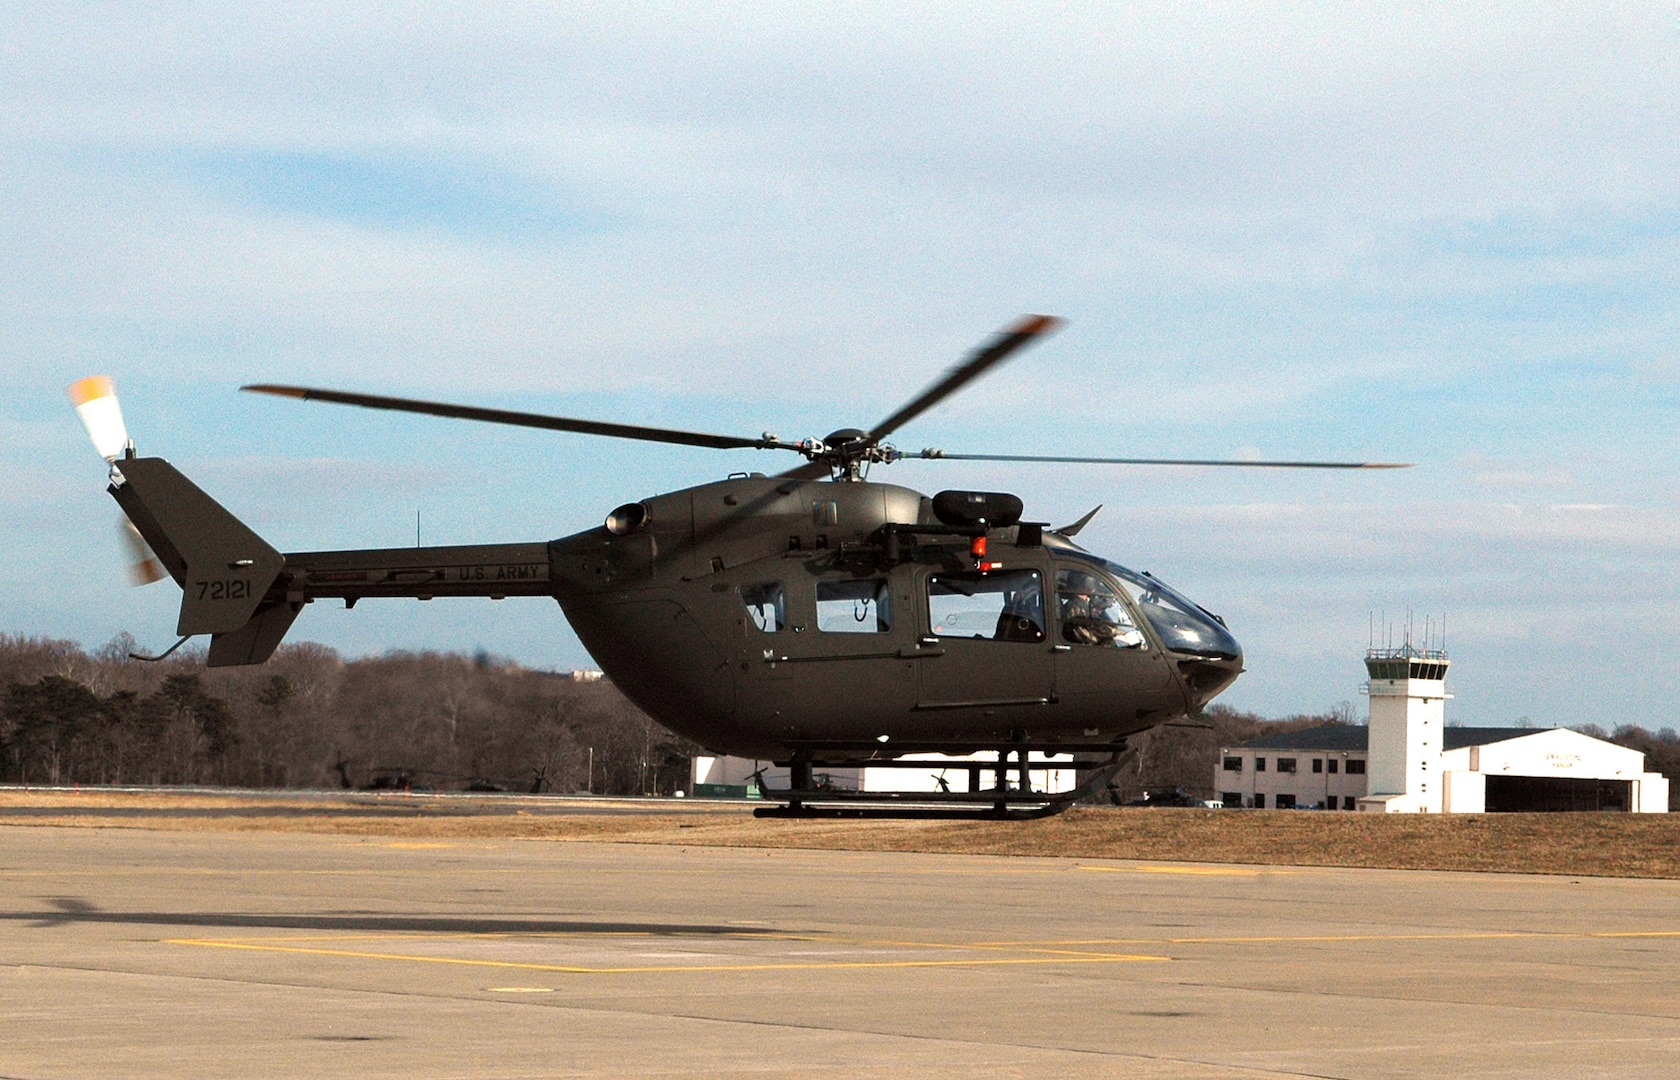 A stock photo of a Virginia National Guard UH72A Lakota taking off from Fort Davison Army Airfield shows a similar UH72A Lakota to the one used by Virginia National Guard Counterdrug aviation to support Homeland Security Investigations and the Virginia State Police Task Force during the summer of 2016. 